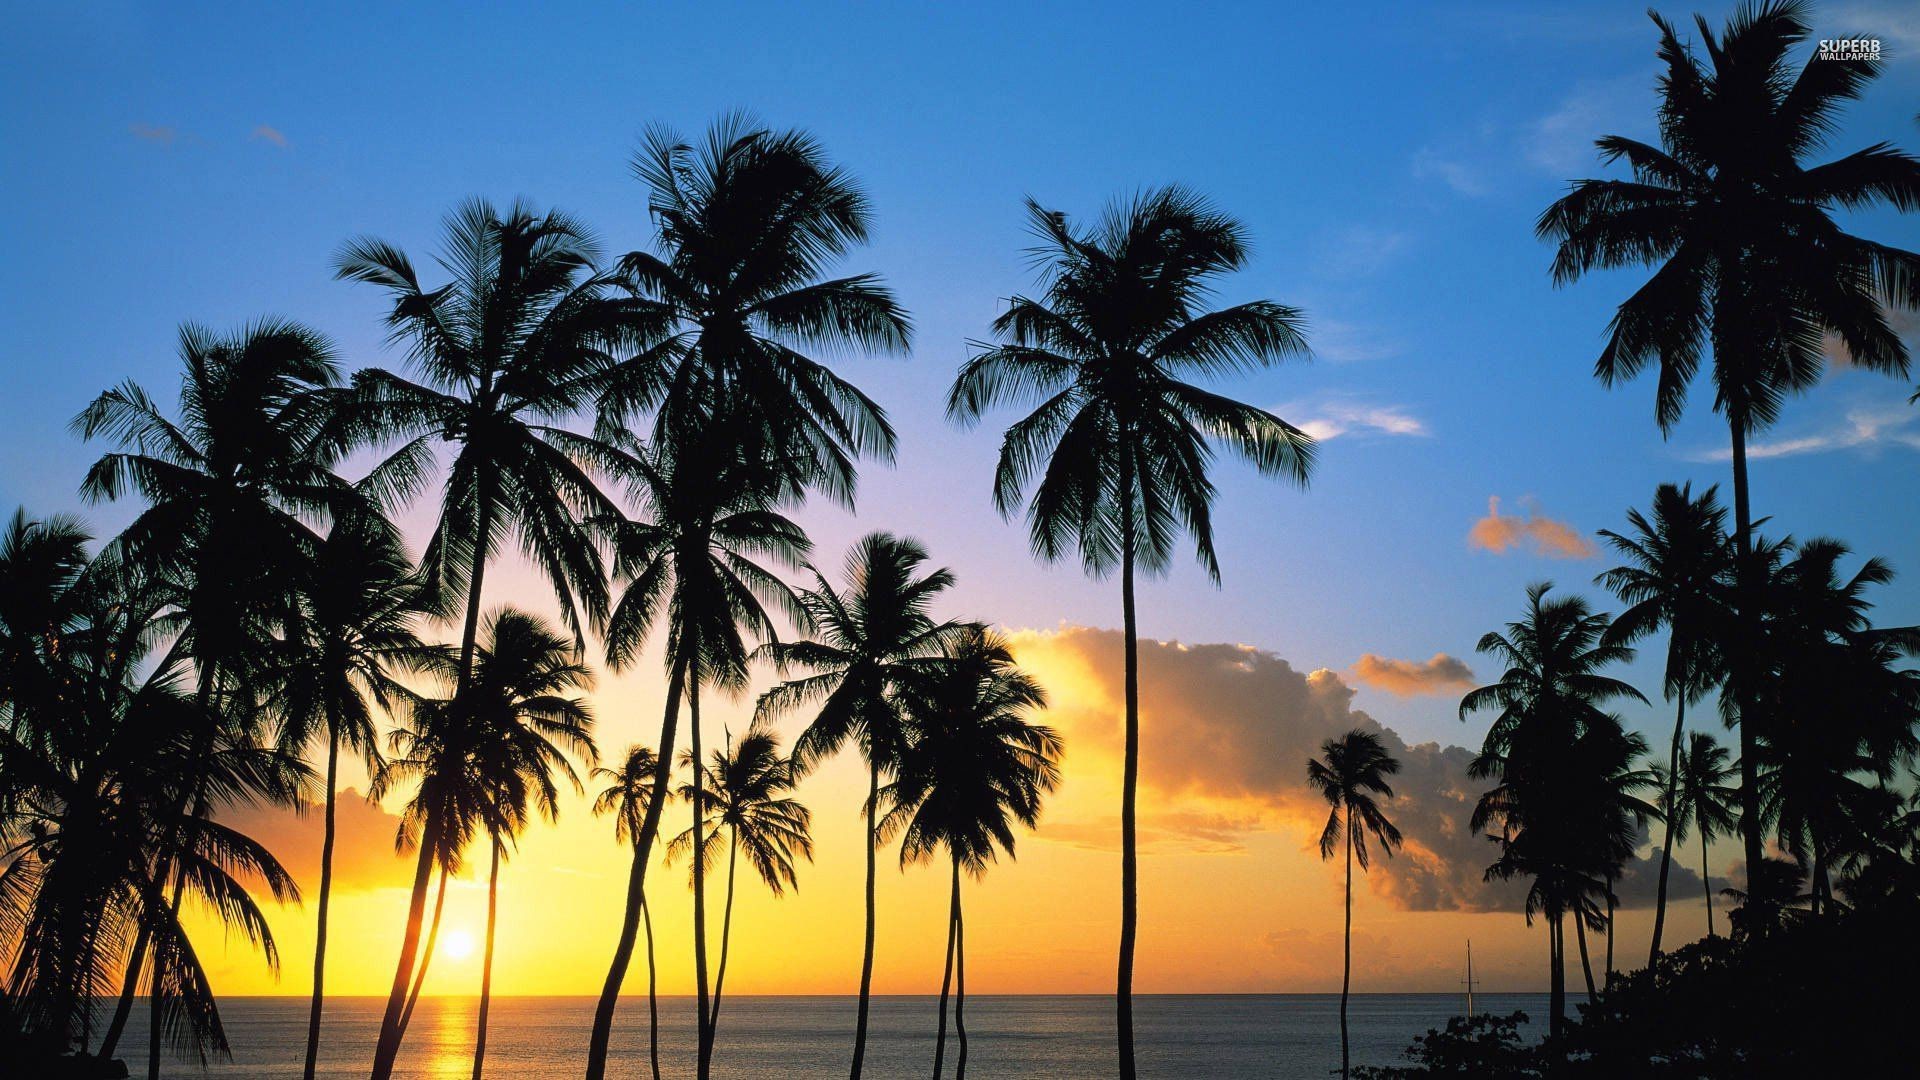 1920x1080 Palm tree silhouettes in the sunset wallpaper - Beach wallpapers .